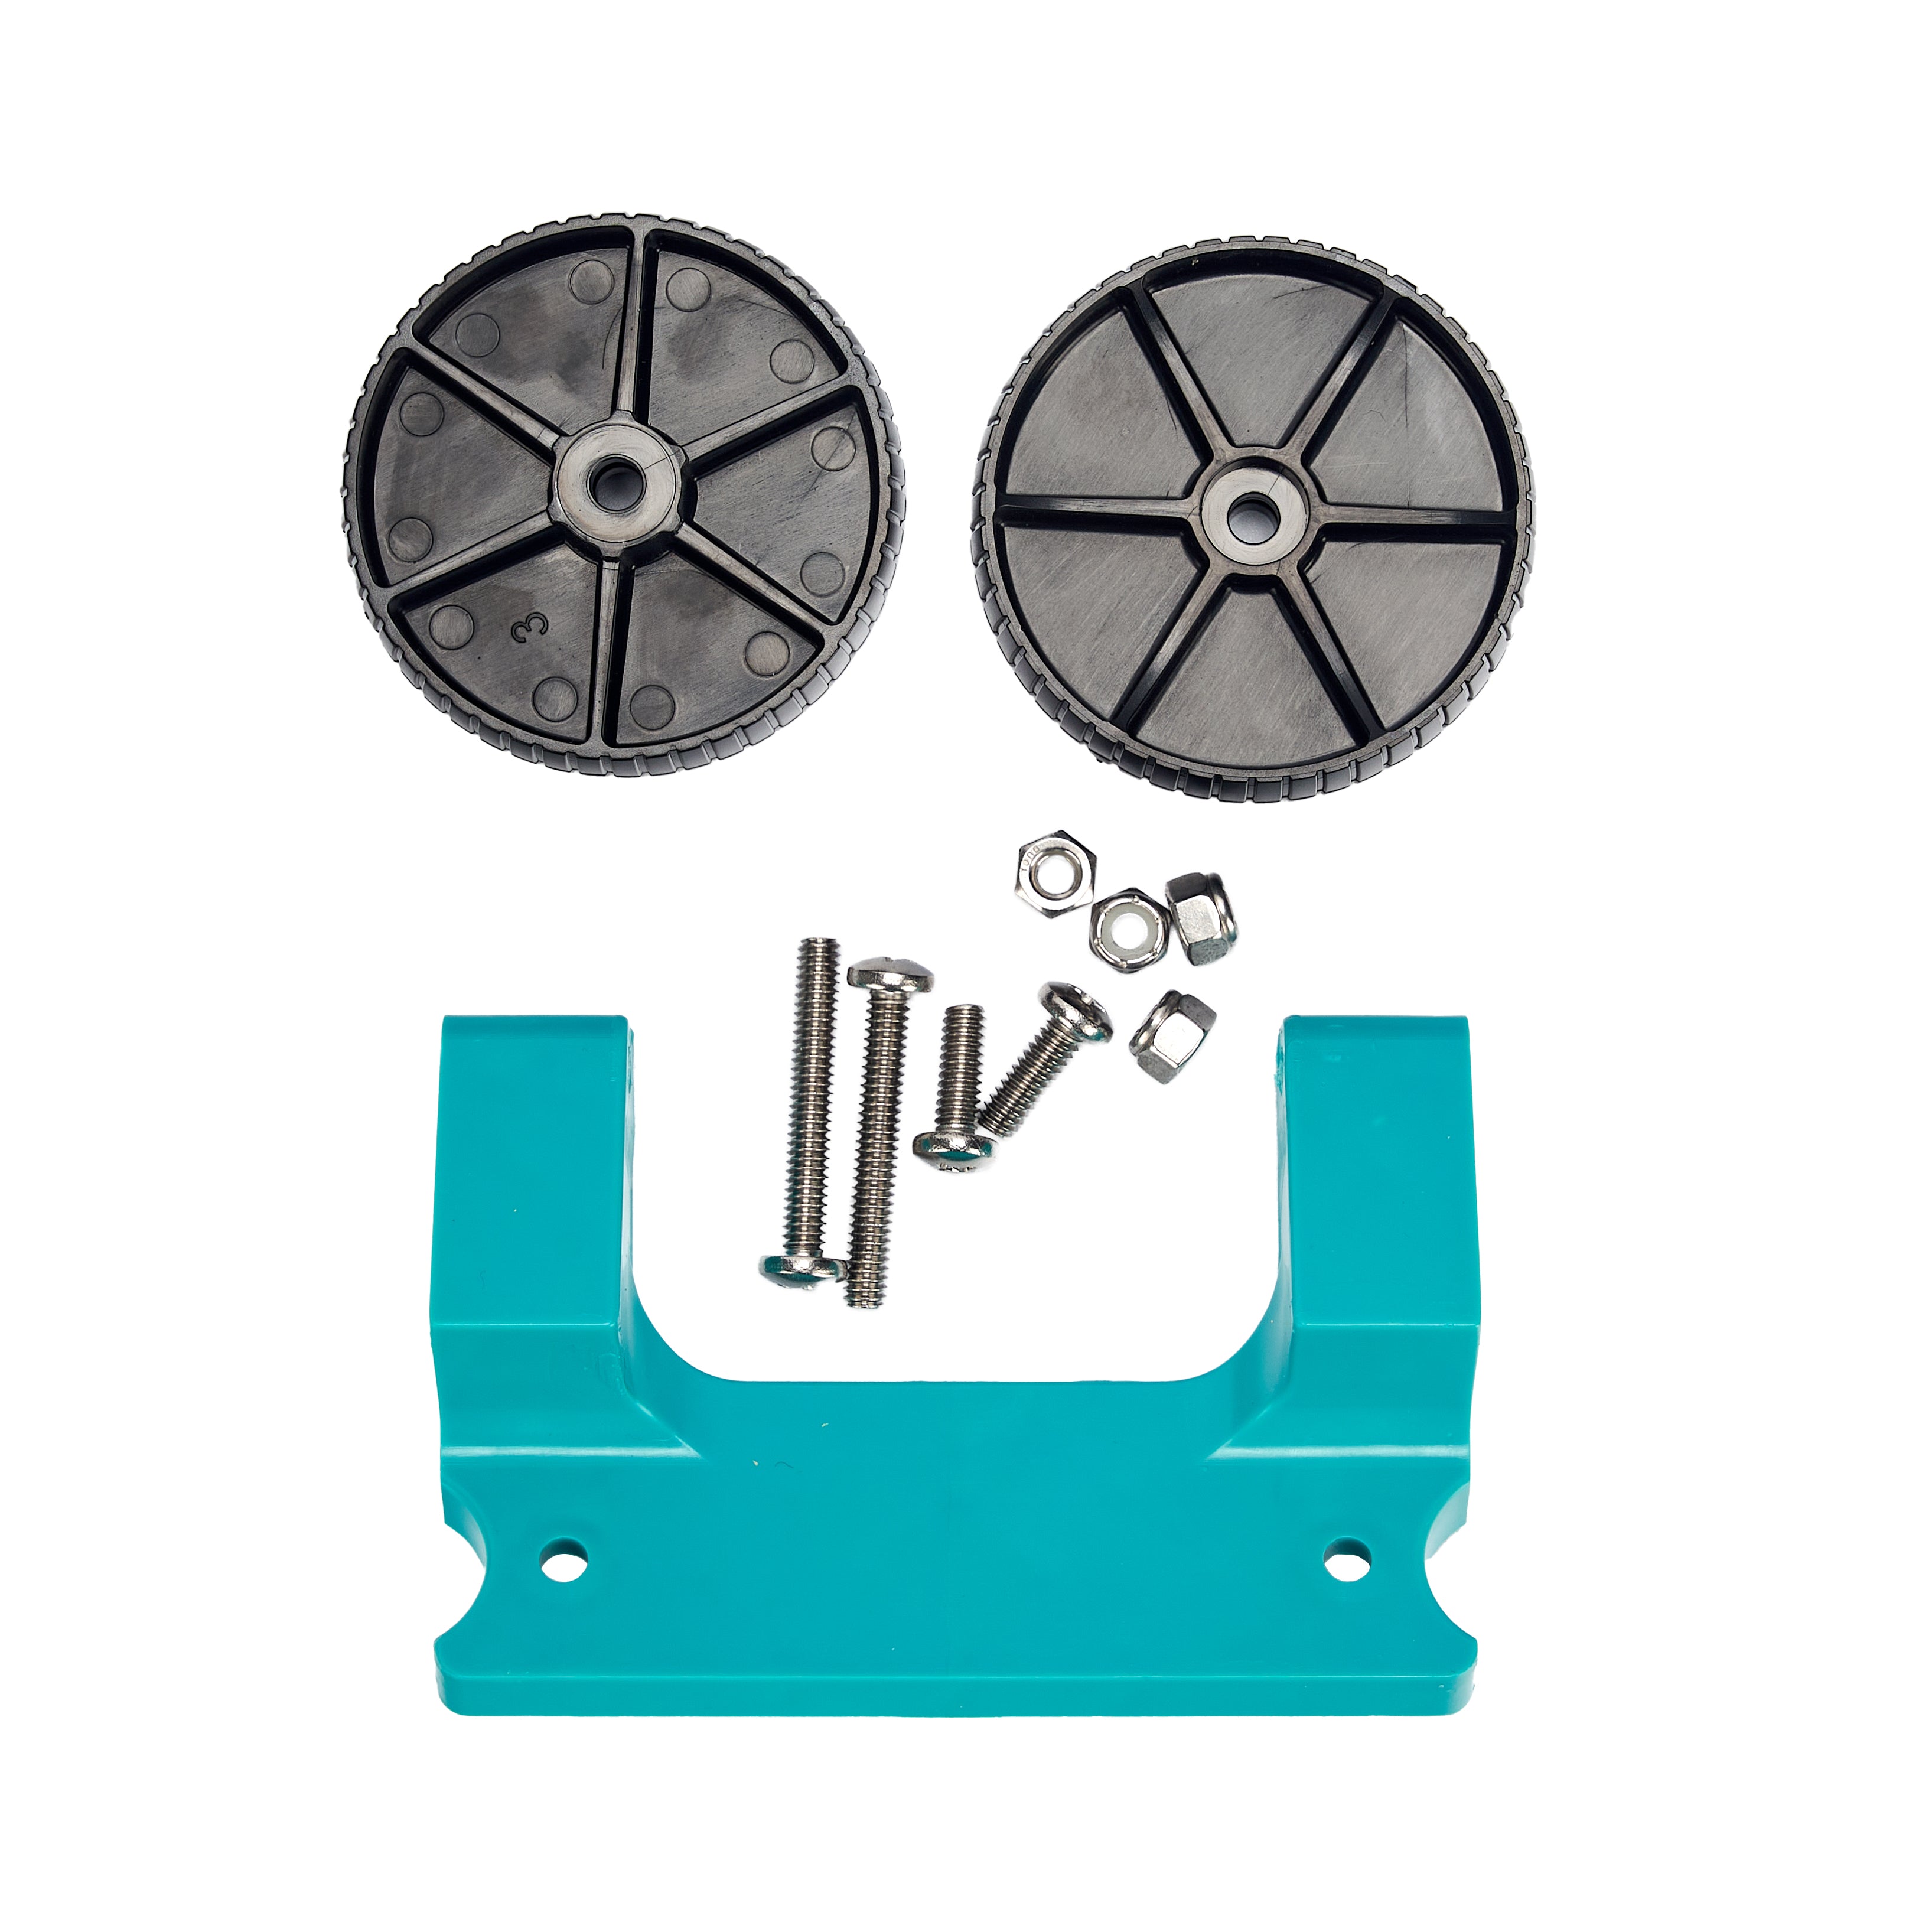 Replacement Part - Wheel Kit for PooPail 1.0 and 2.0